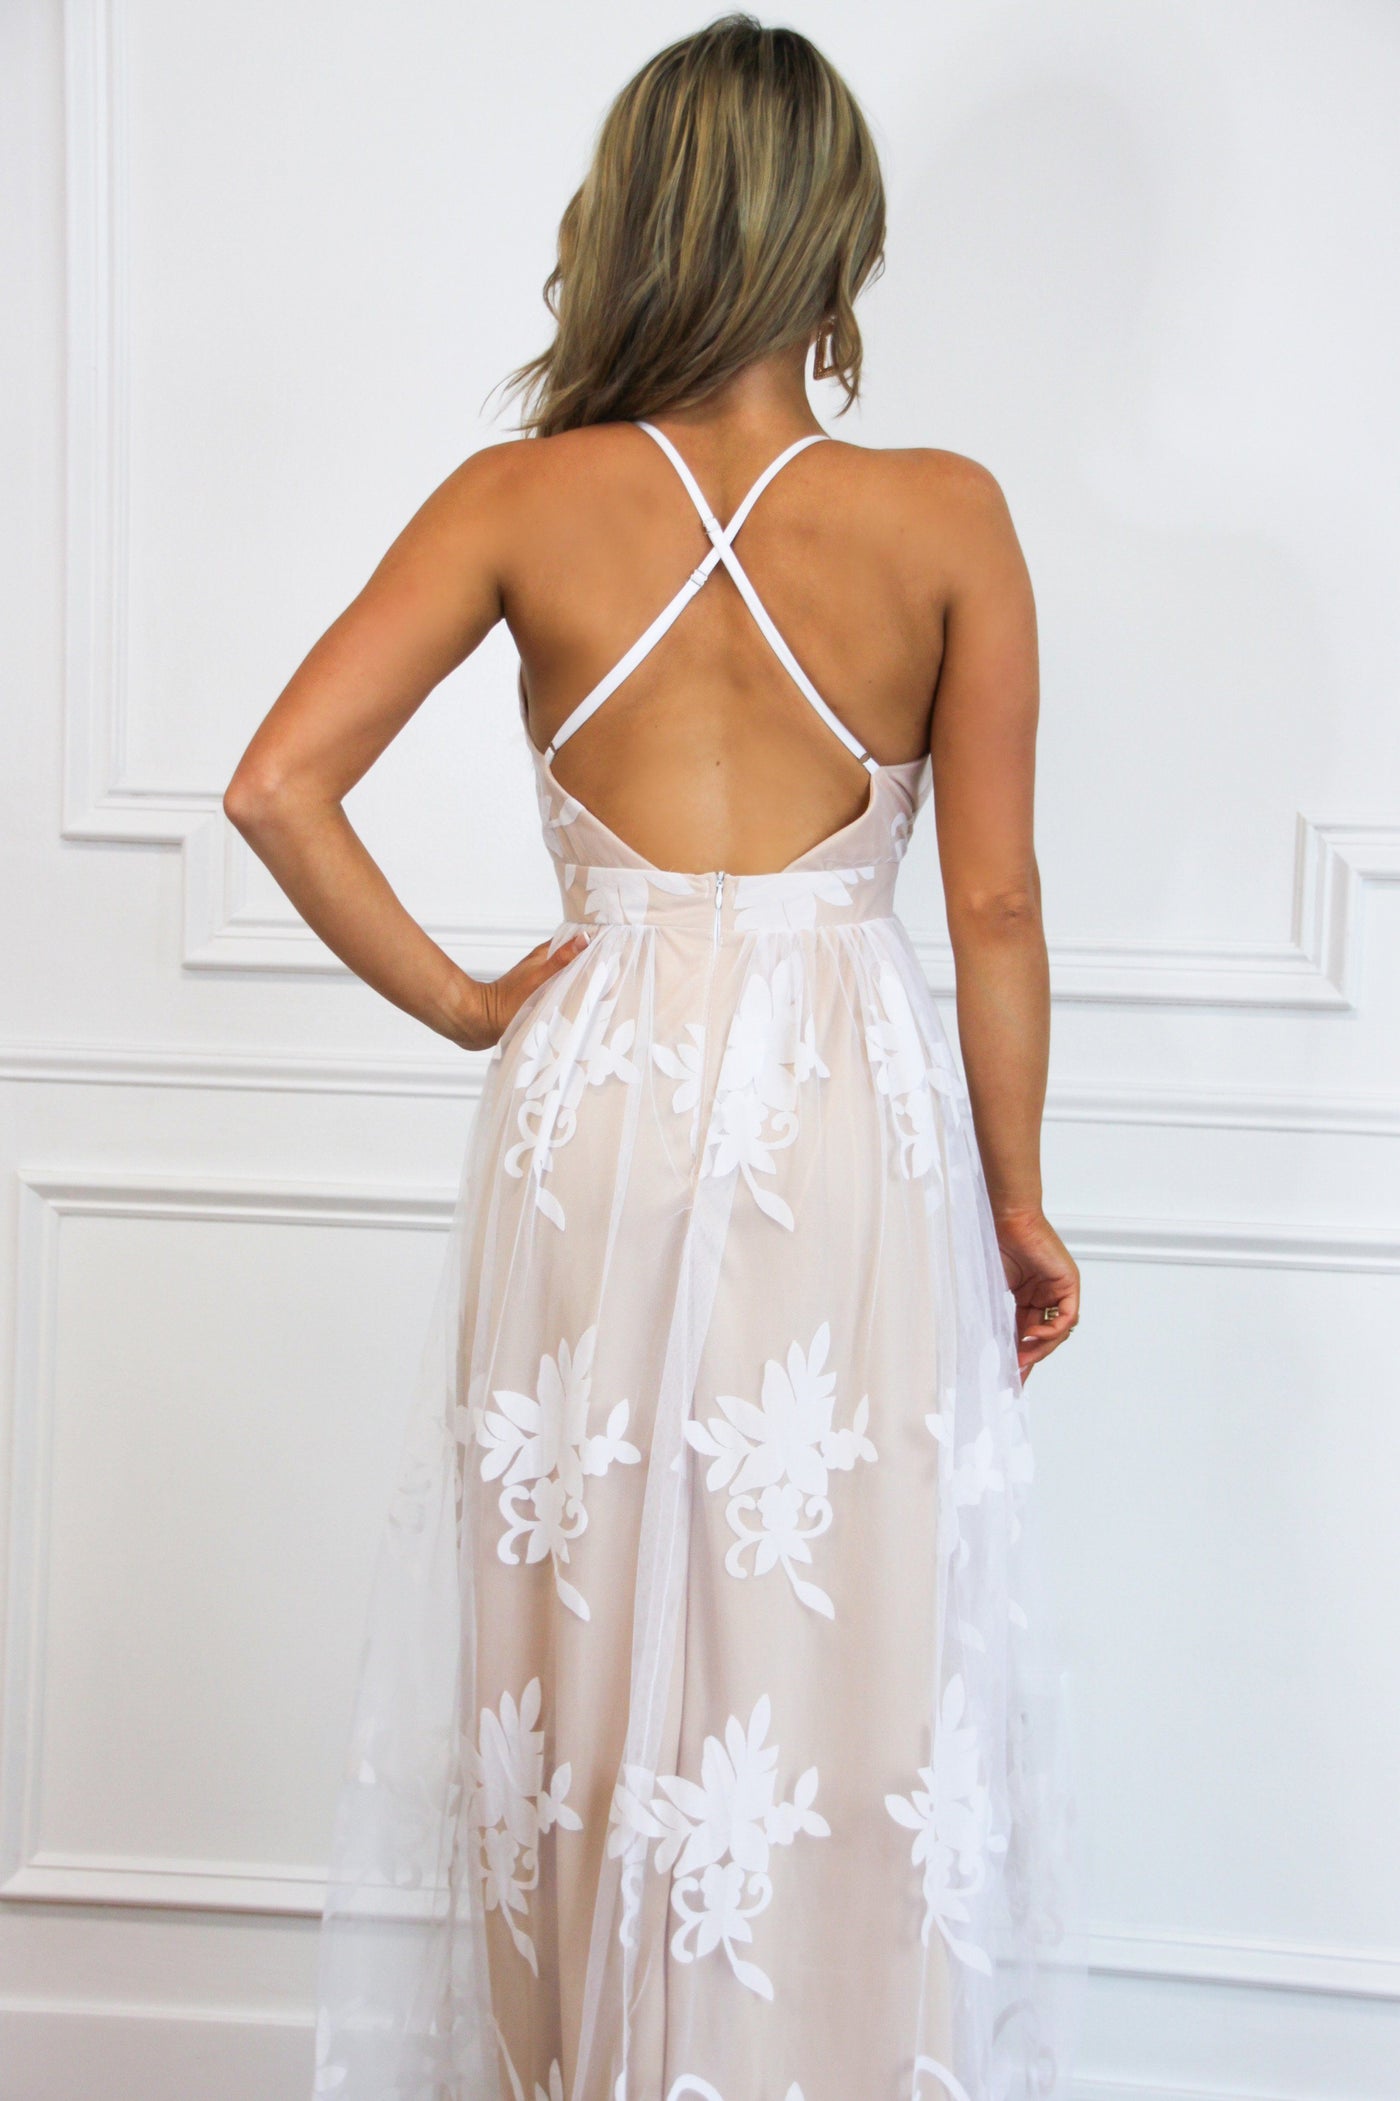 Here Comes the Bride Maxi Dress: White/Nude - Bella and Bloom Boutique